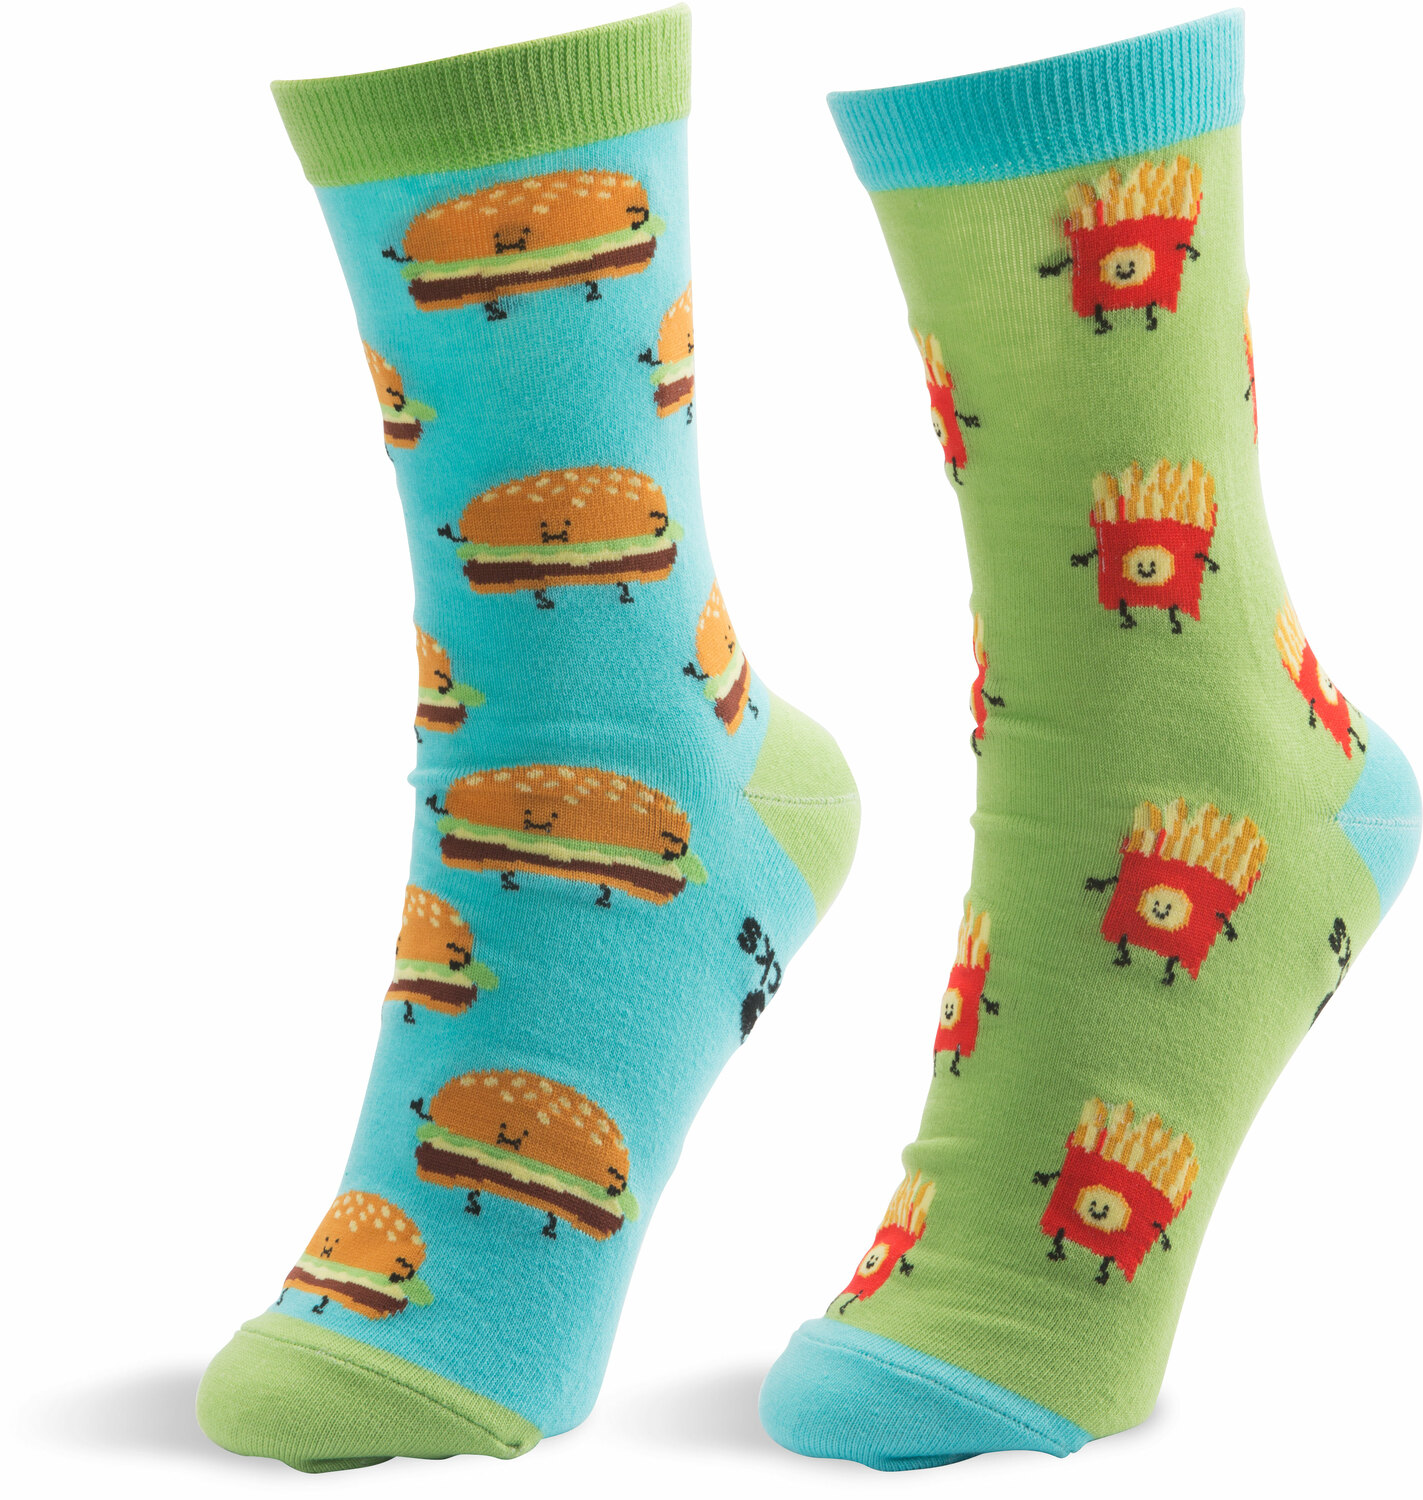 Cheeseburger and Fries by Late Night Snacks - Cheeseburger and Fries - M/L Unisex Sock